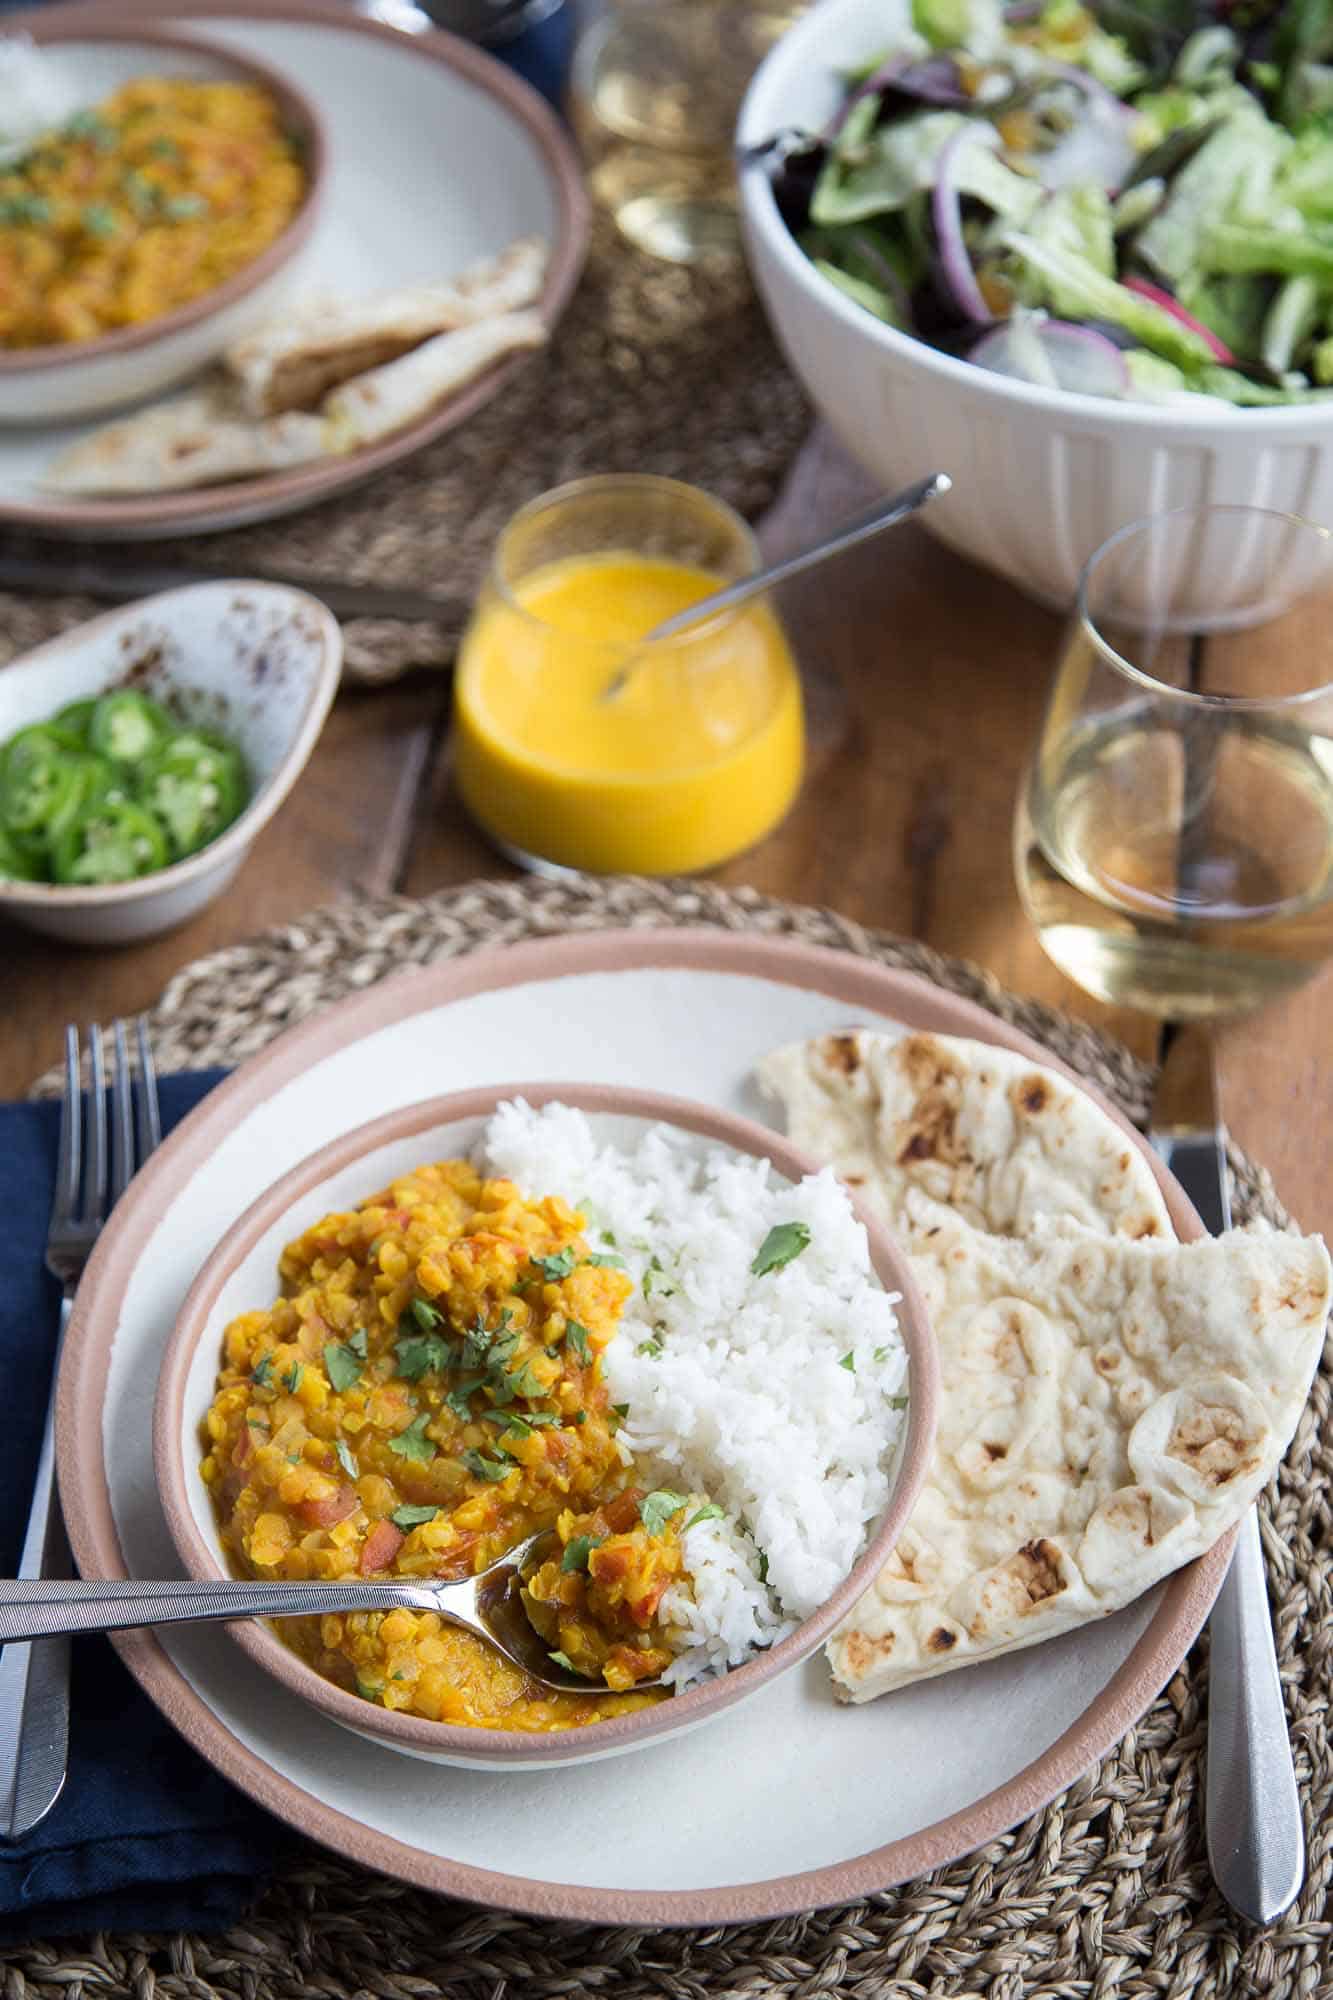 Vegetarian Red Lentil Dal on a dinner table with rice, naan, a green salad, and a glass of white wine.